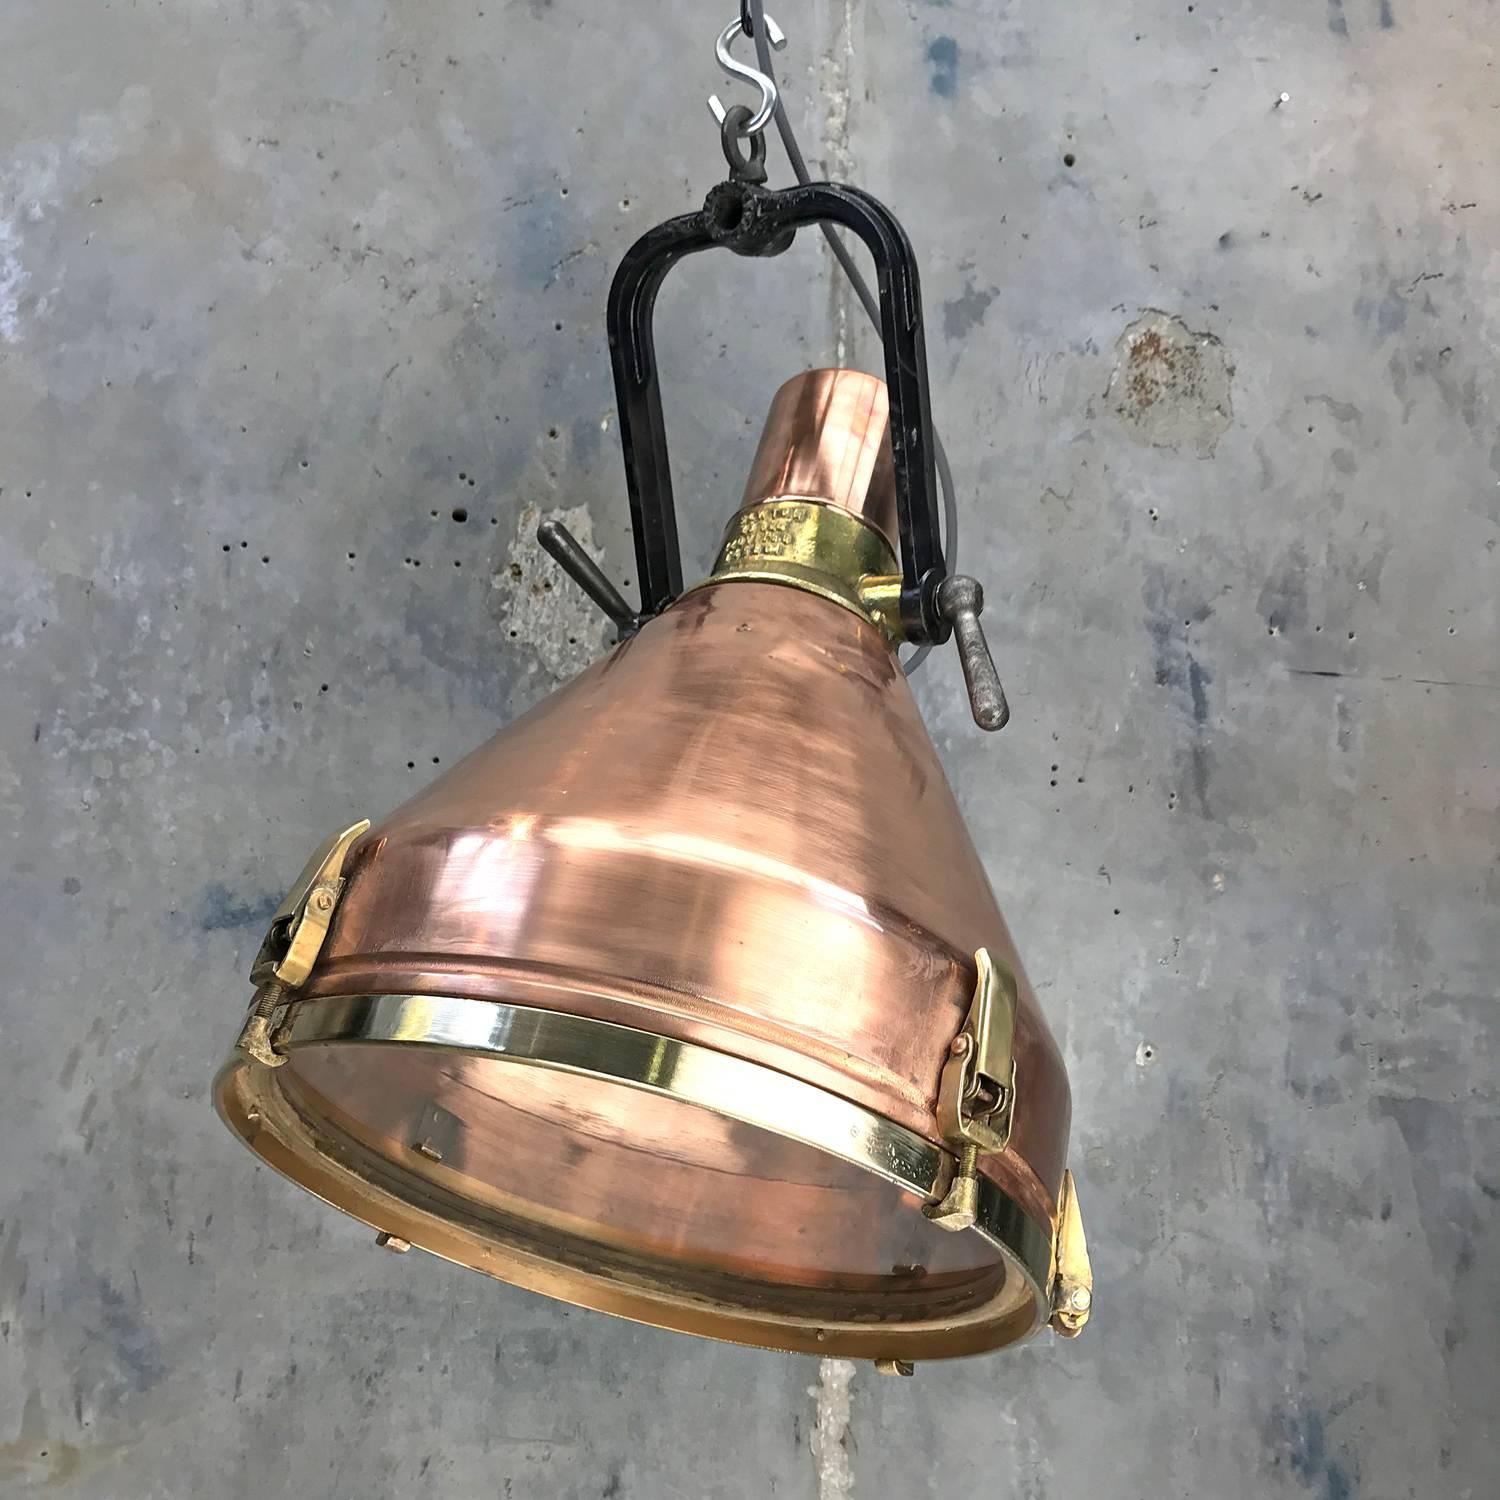 German made copper and brass bridge lights, circa 1960 by VEB 

Reclaimed from bridges and gantry's of supertankers, cargo ships and load cranes.

The main body is spun copper with a lovely rich polished copper finish, the glass bezel and quick